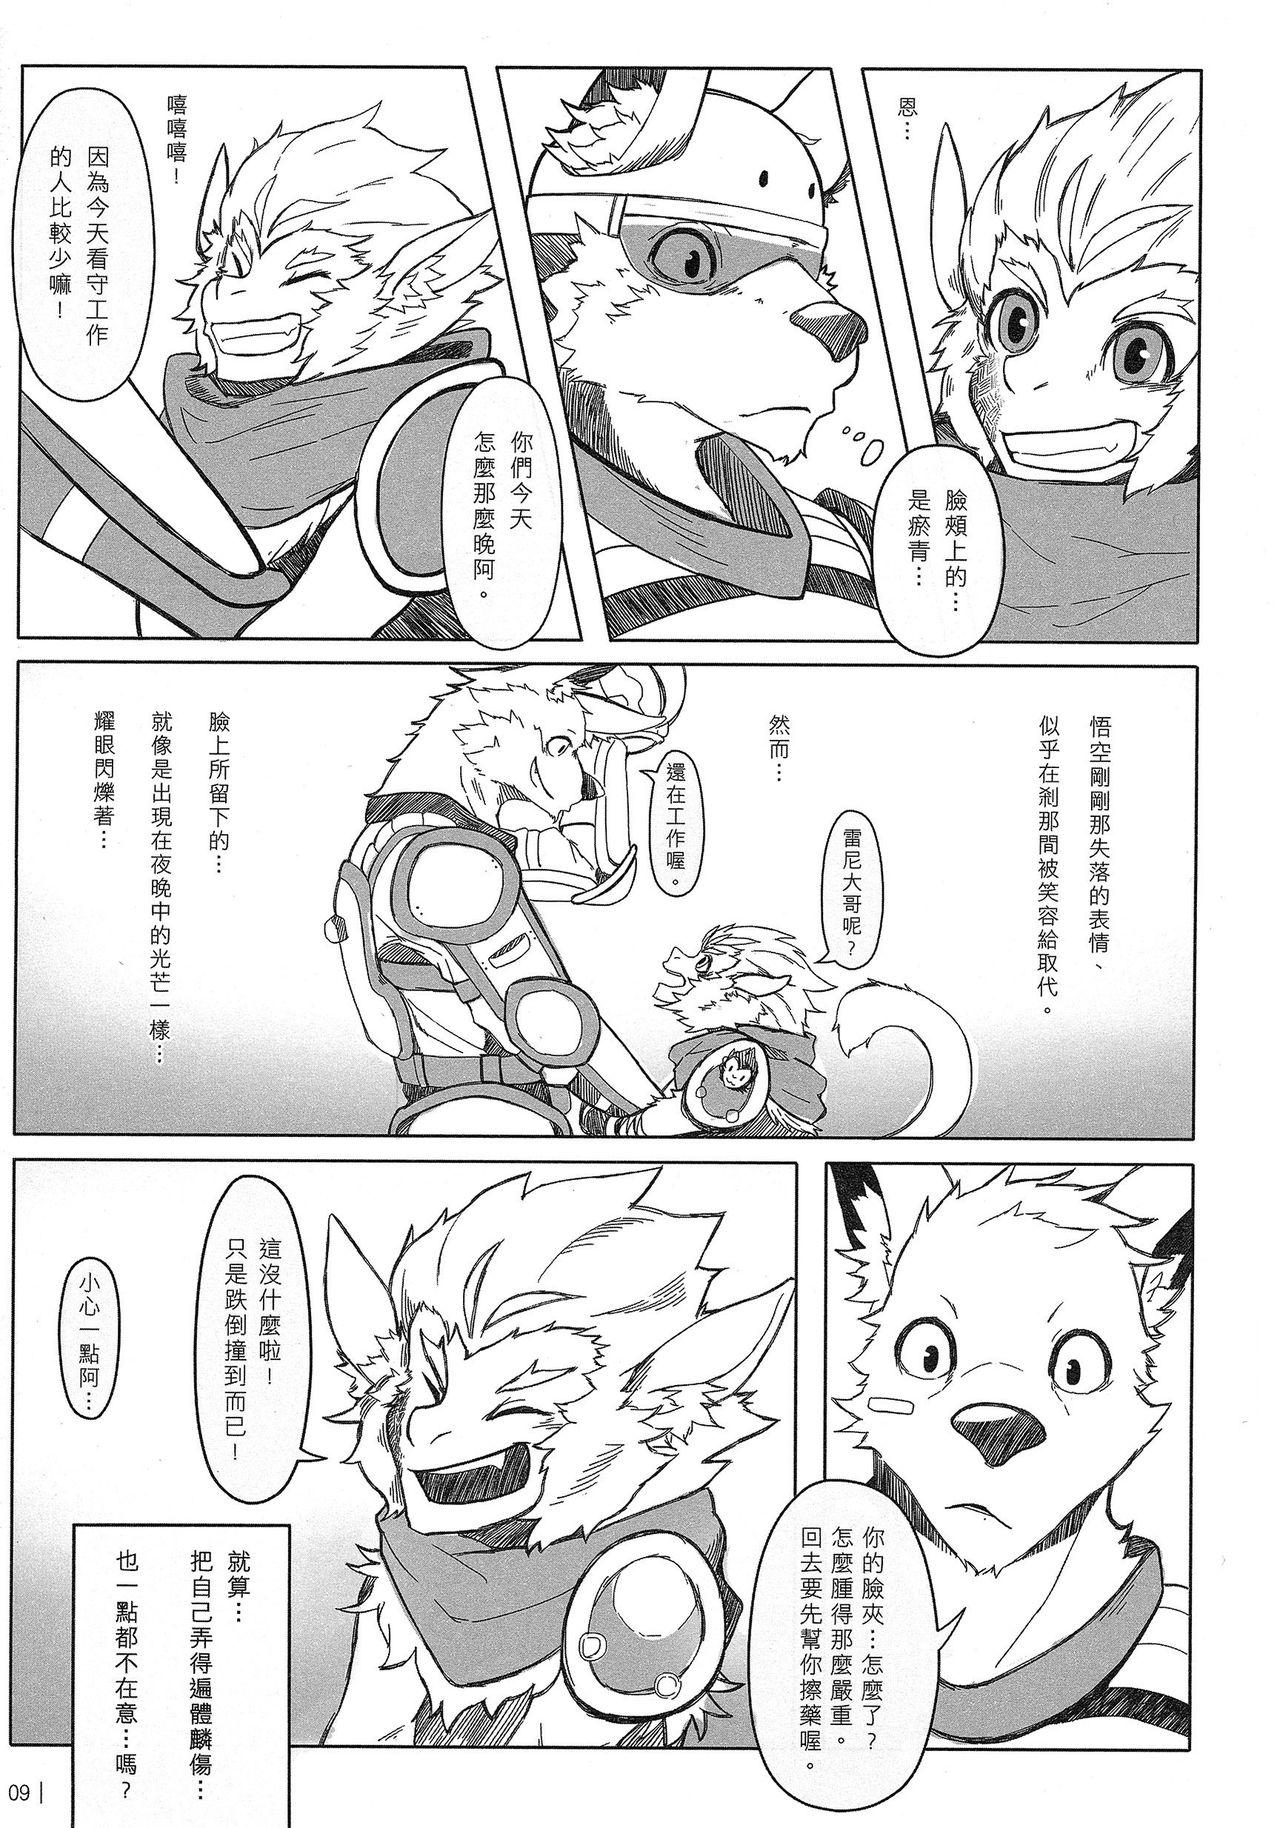 Perfect Pussy 叛逆英雄 Rebel Hero - League of legends Sexteen - Page 10